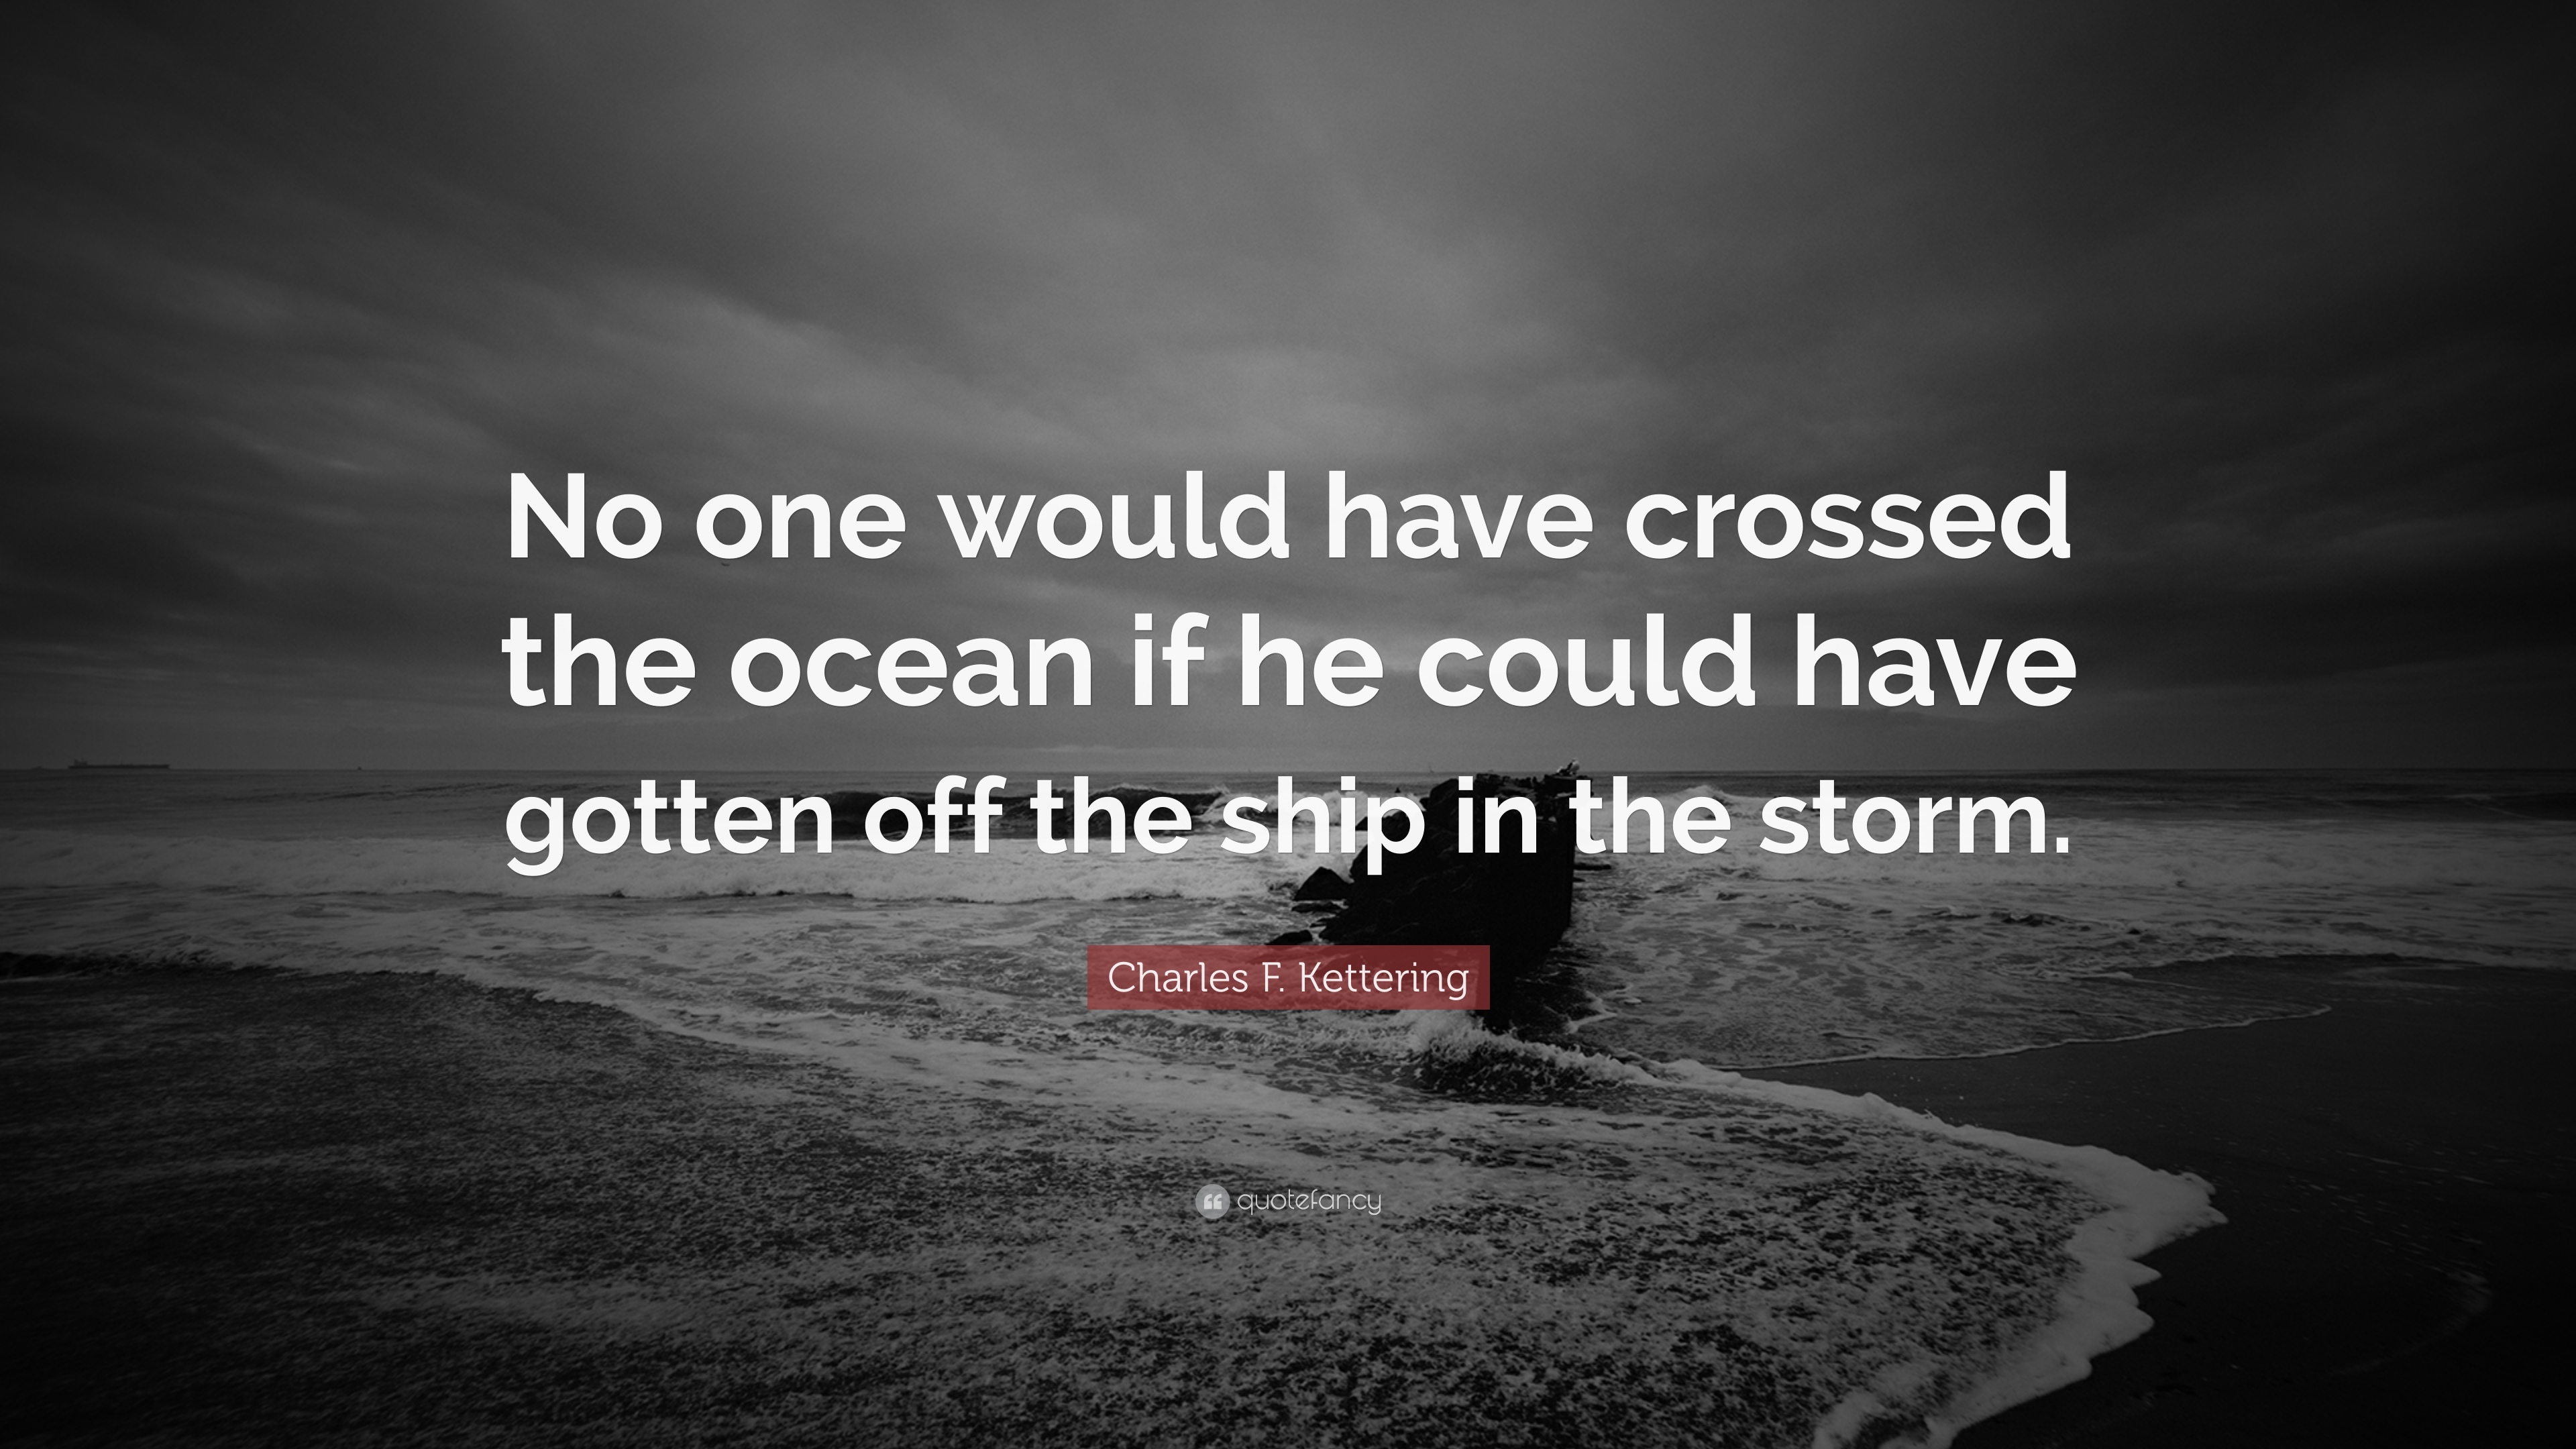 Quote of the day: "No one would ever have crossed the ocean if he coul...